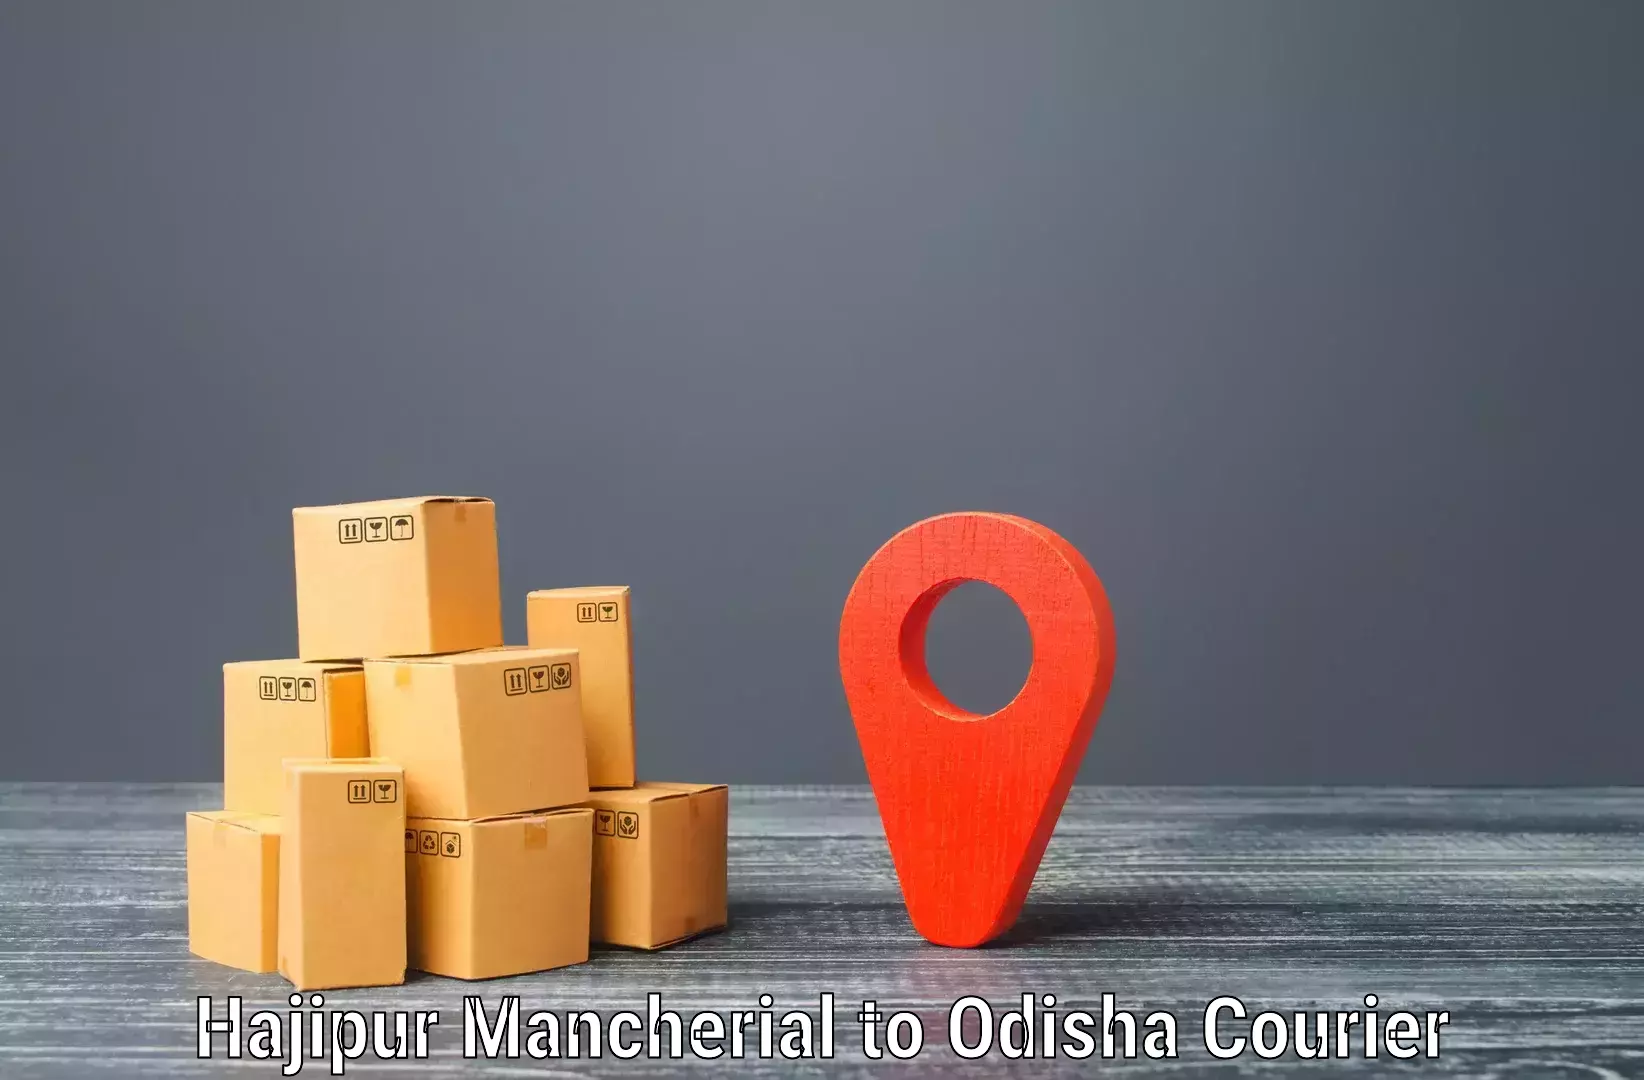 Dynamic courier operations Hajipur Mancherial to Balimela